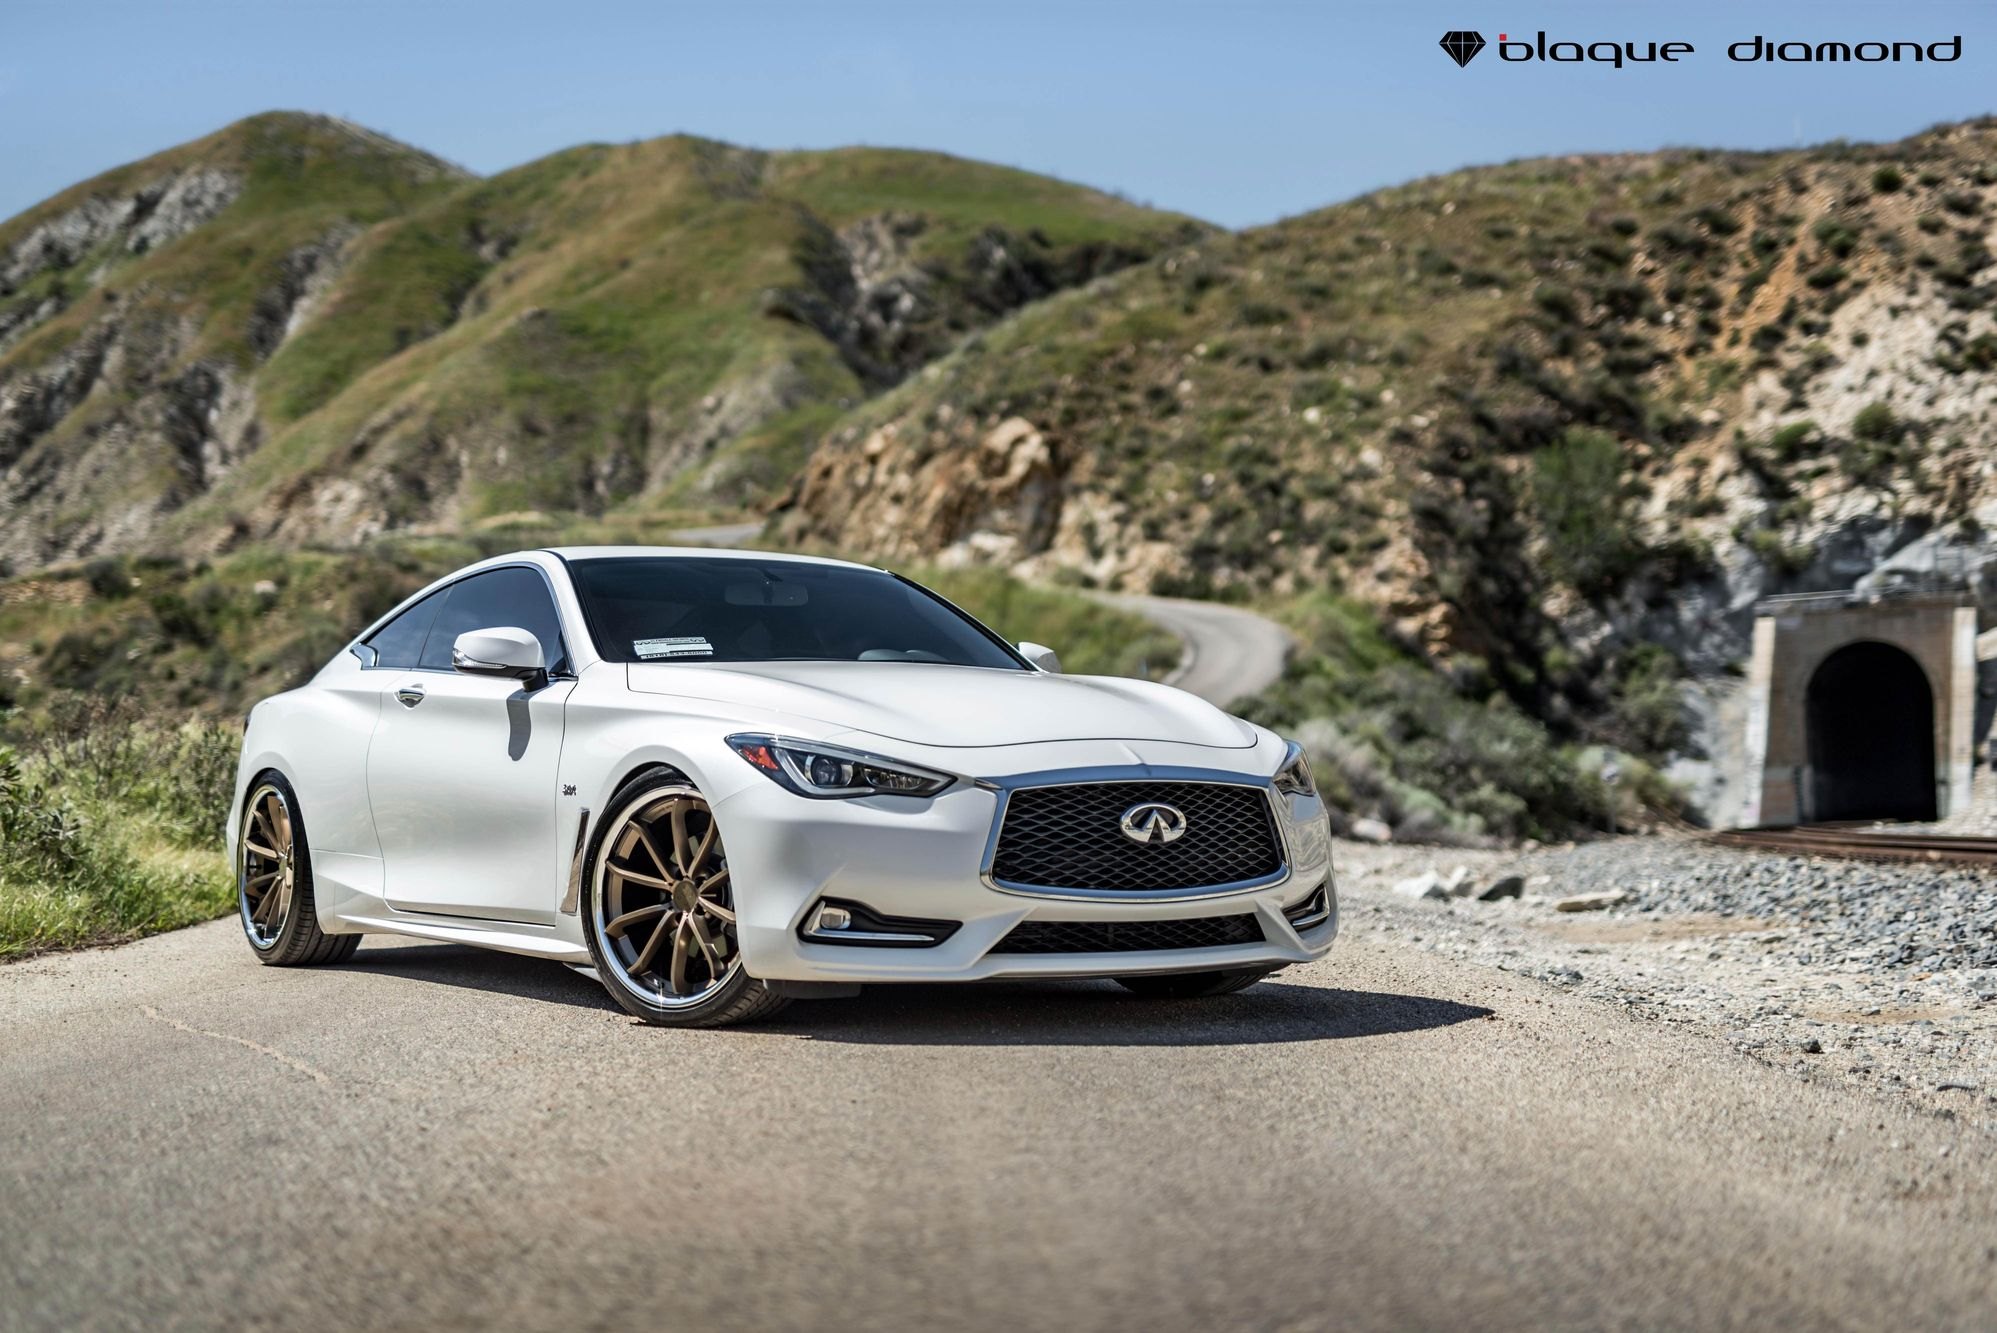 Captivating Infiniti Q60 With White Exterior Color And